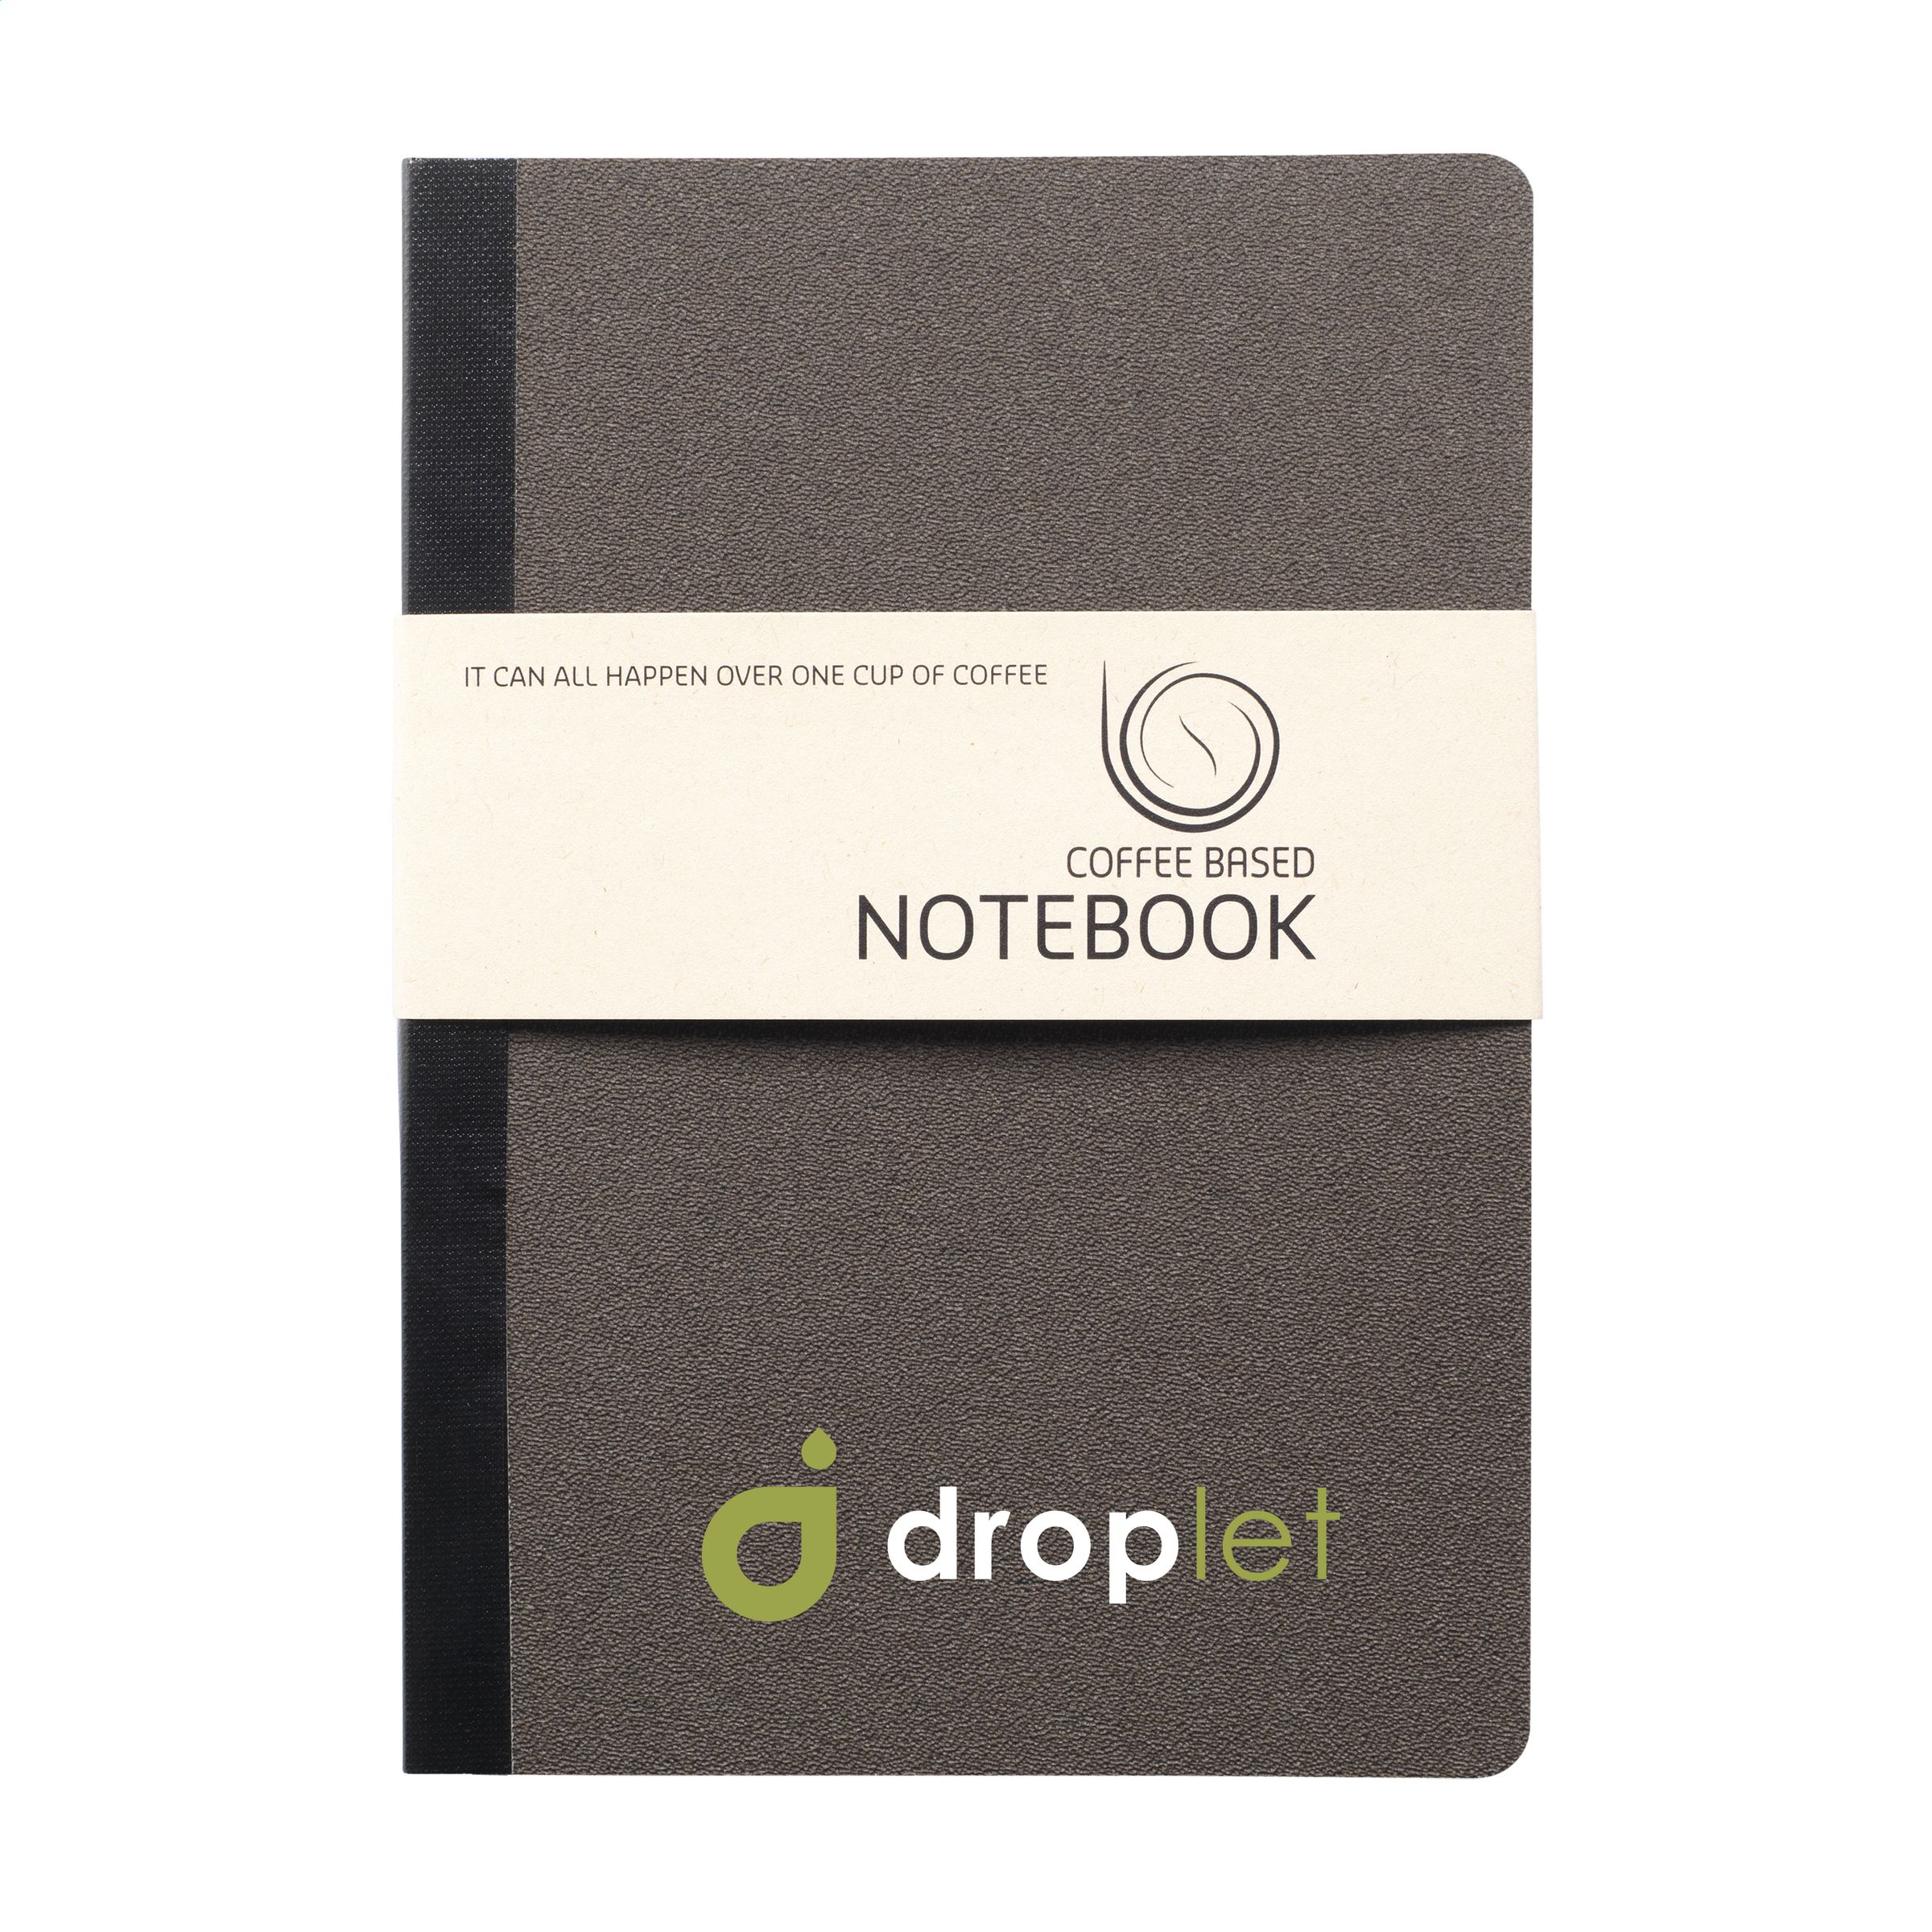 A5 size notebook with a Coffee Grounds theme - Gateacre